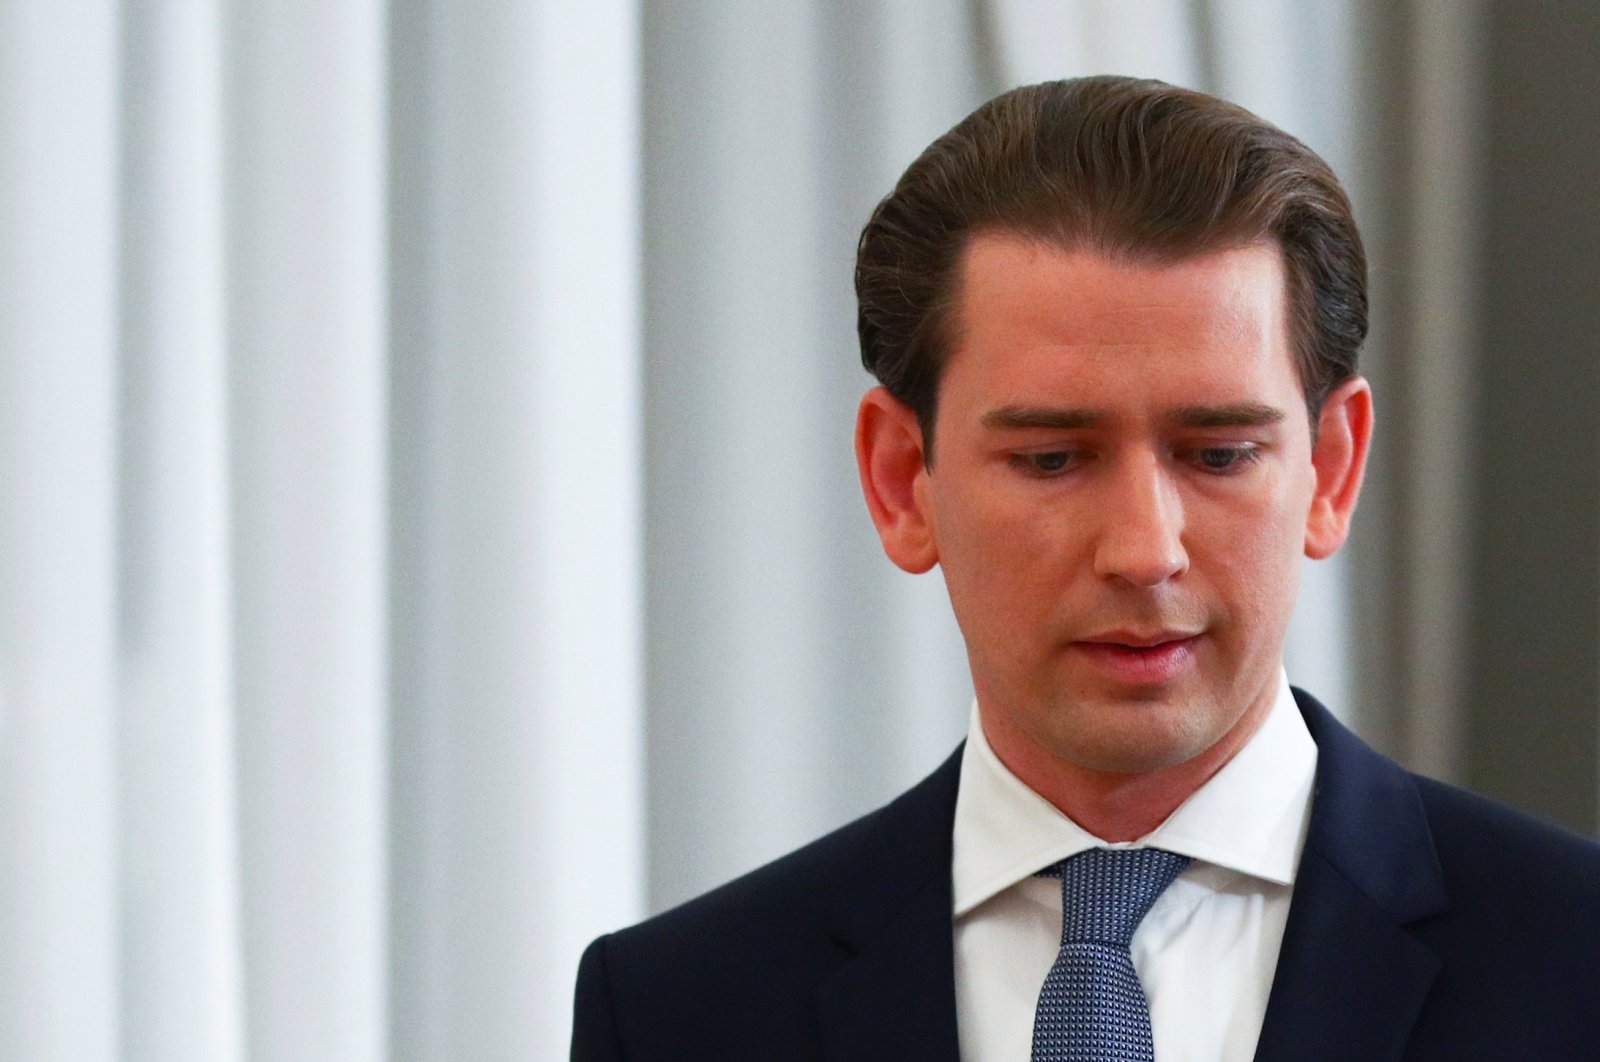 Austria's Chancellor Sebastian Kurz leaves after making a statement at the Chancellery in Vienna, Austria, Oct. 8, 2021. (Reuters Photo)